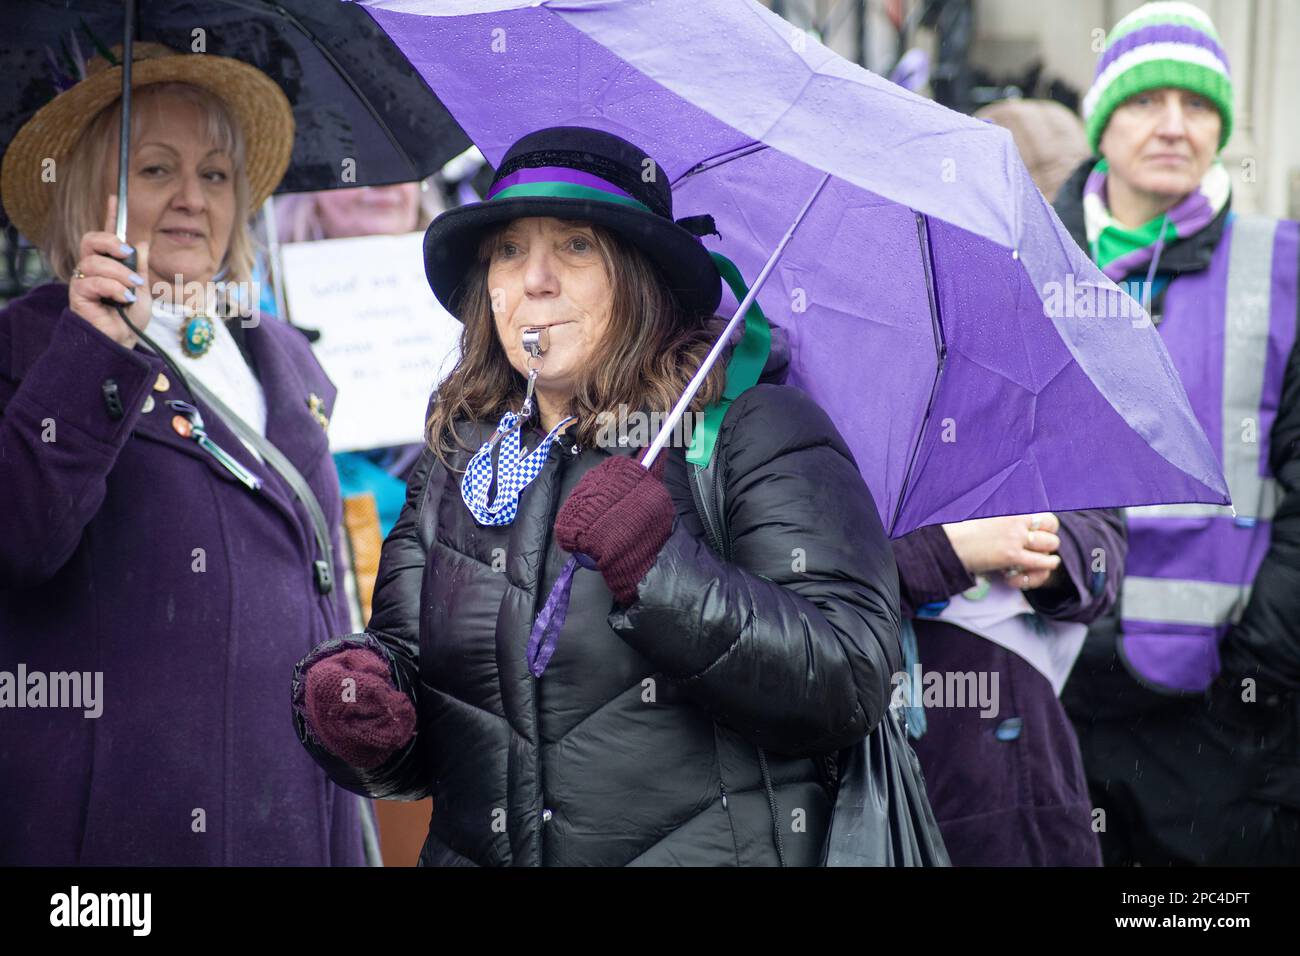 Women from WASPI-Women Against State Pension Inequality-protested against the change in retirement age. Credit: Sinai Noor/Alamy Stock Photo Stock Photo